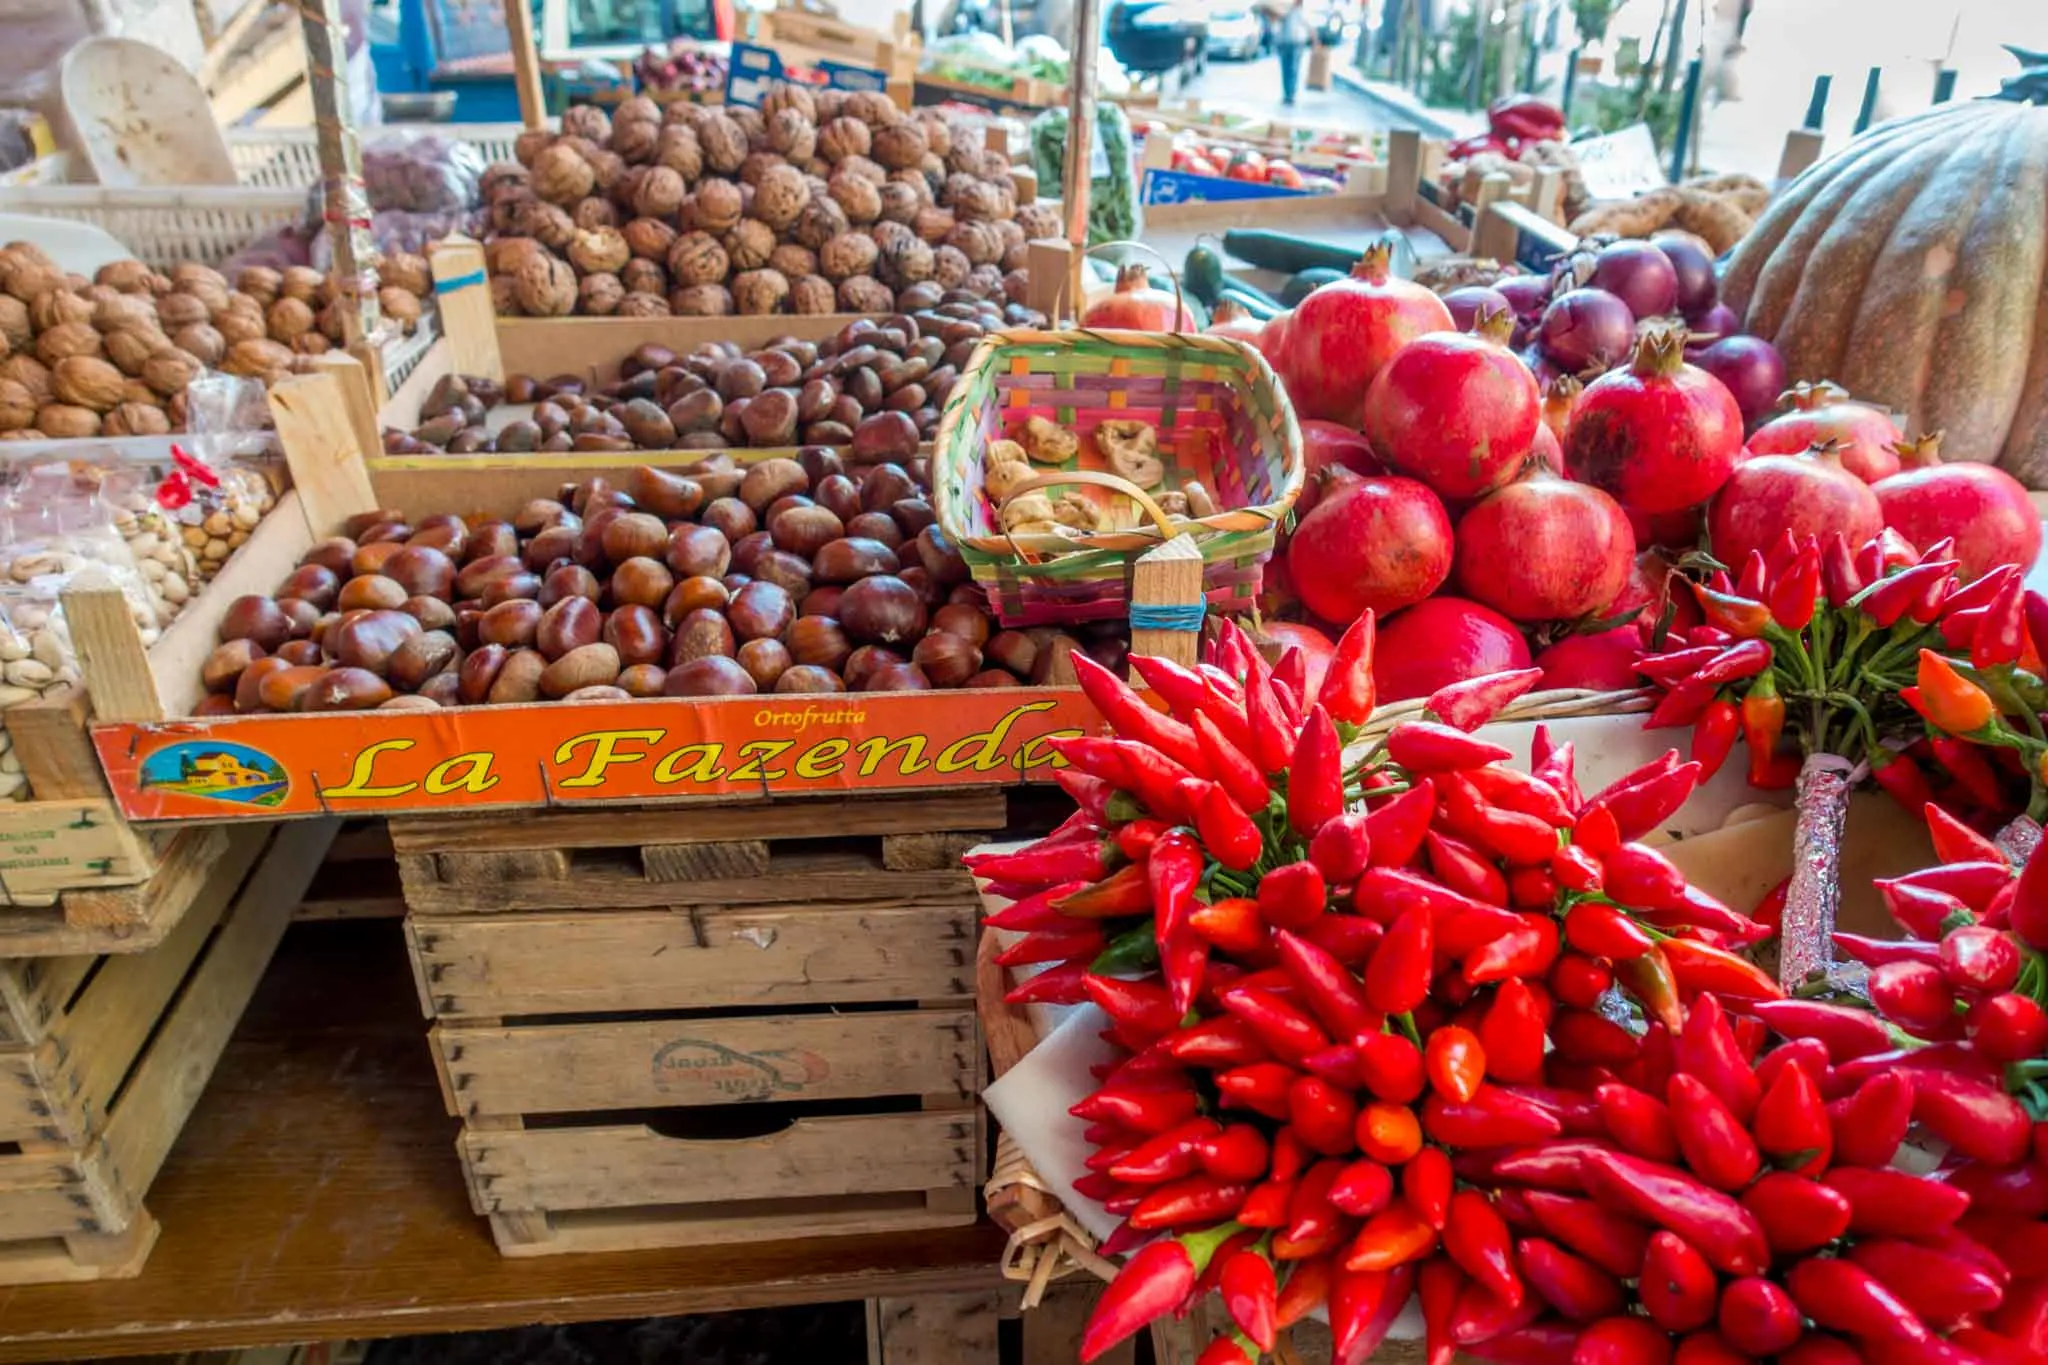 Fruit, vegetables, and nuts on display at a market.